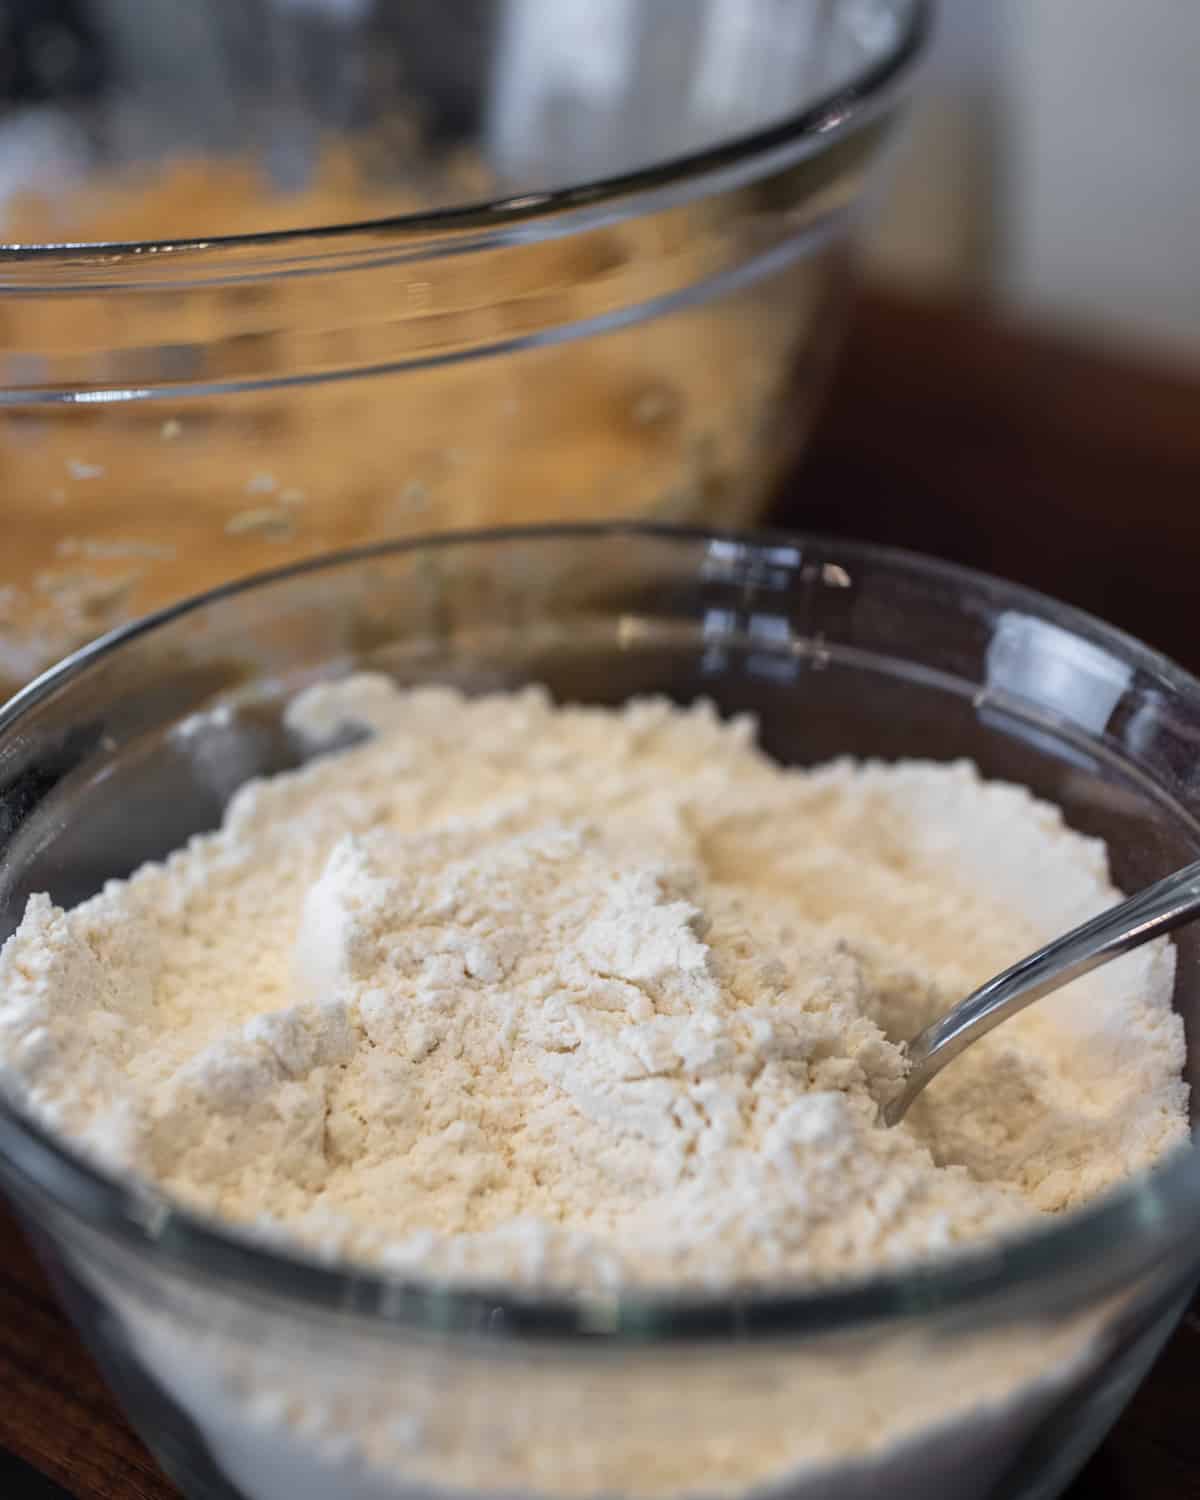 Flour and other dry ingredients in a glass bowl being sifted with a spoon.